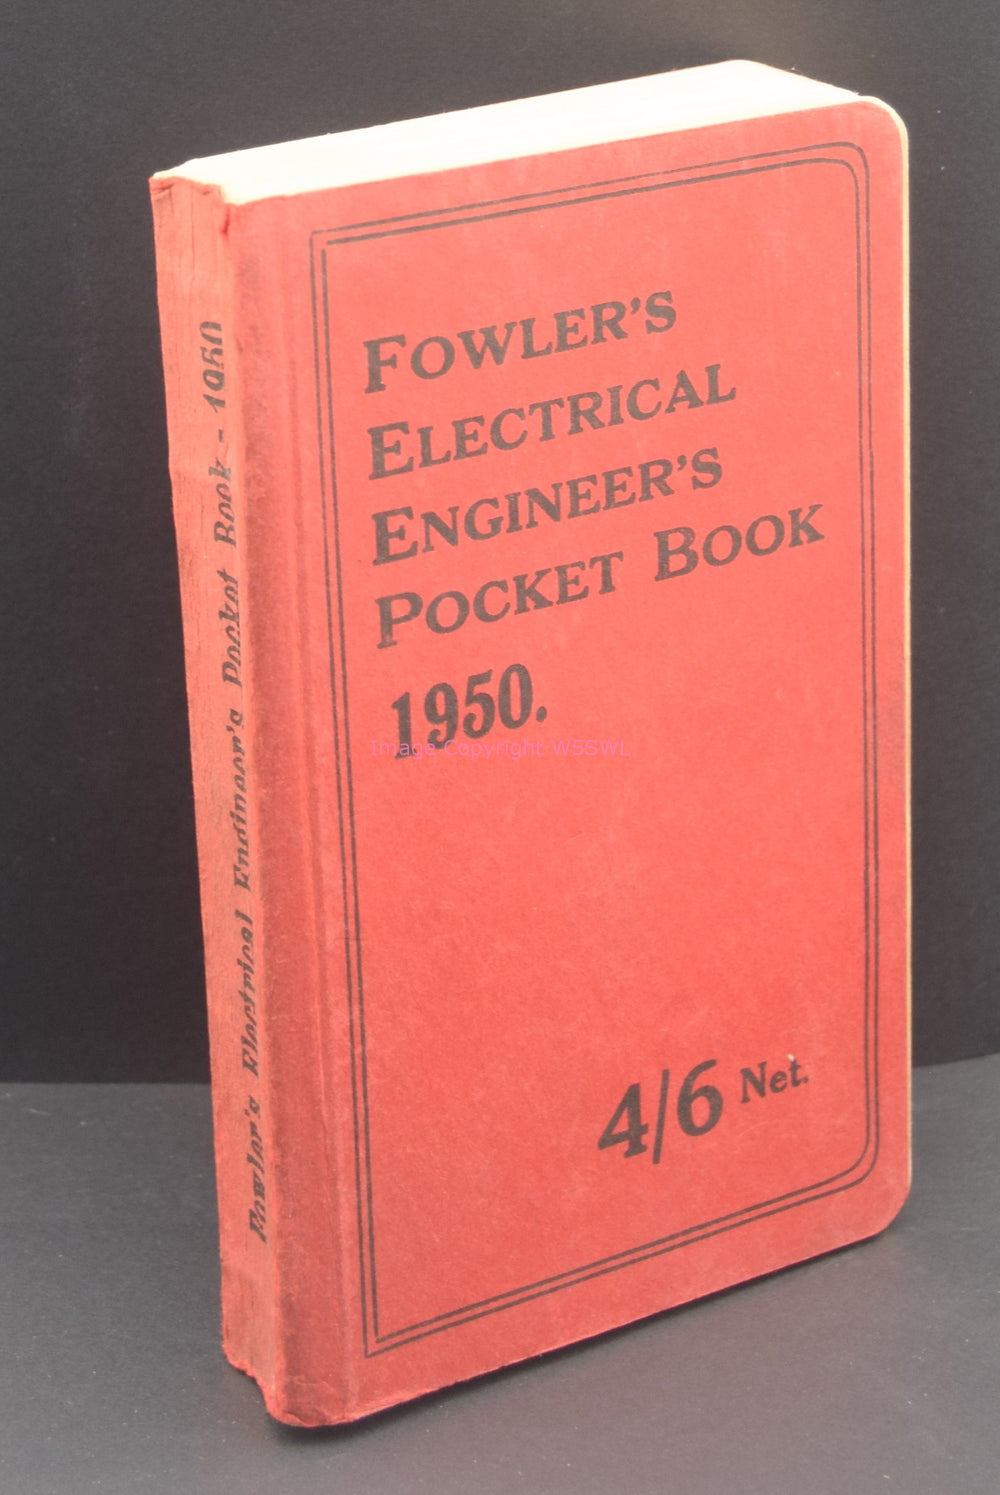 Fowlers Electrical Engineers Pocket Book 1950 50th Annual Edition Scientific Pub - Dave's Hobby Shop by W5SWL